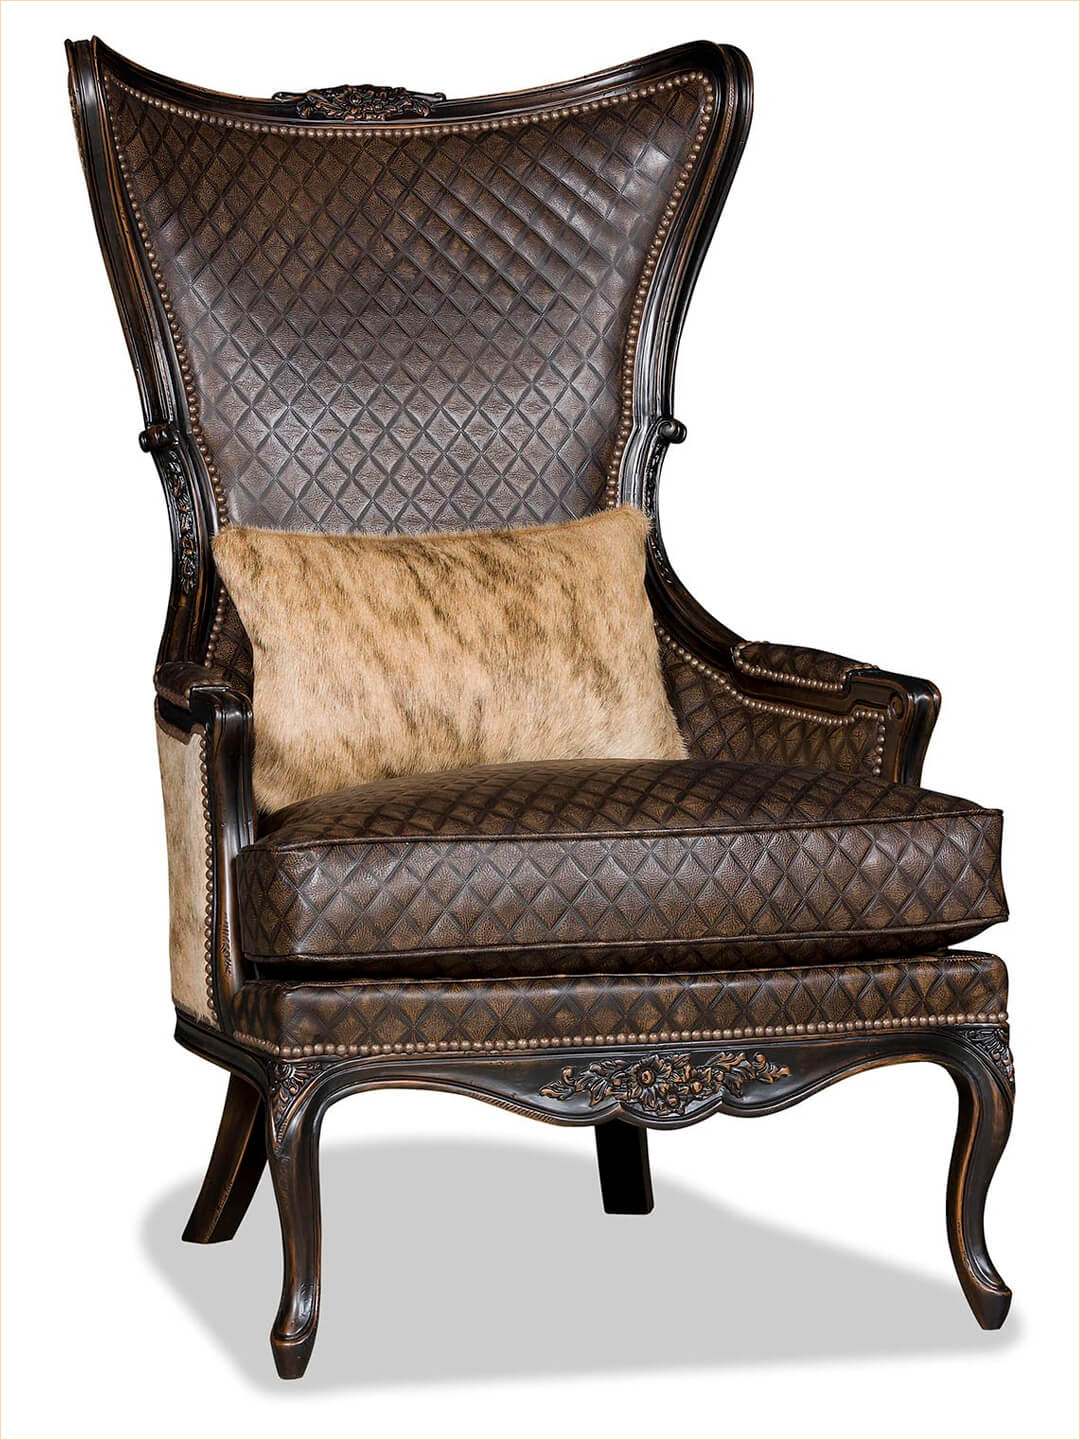 brown leather axis chair with light hide on back